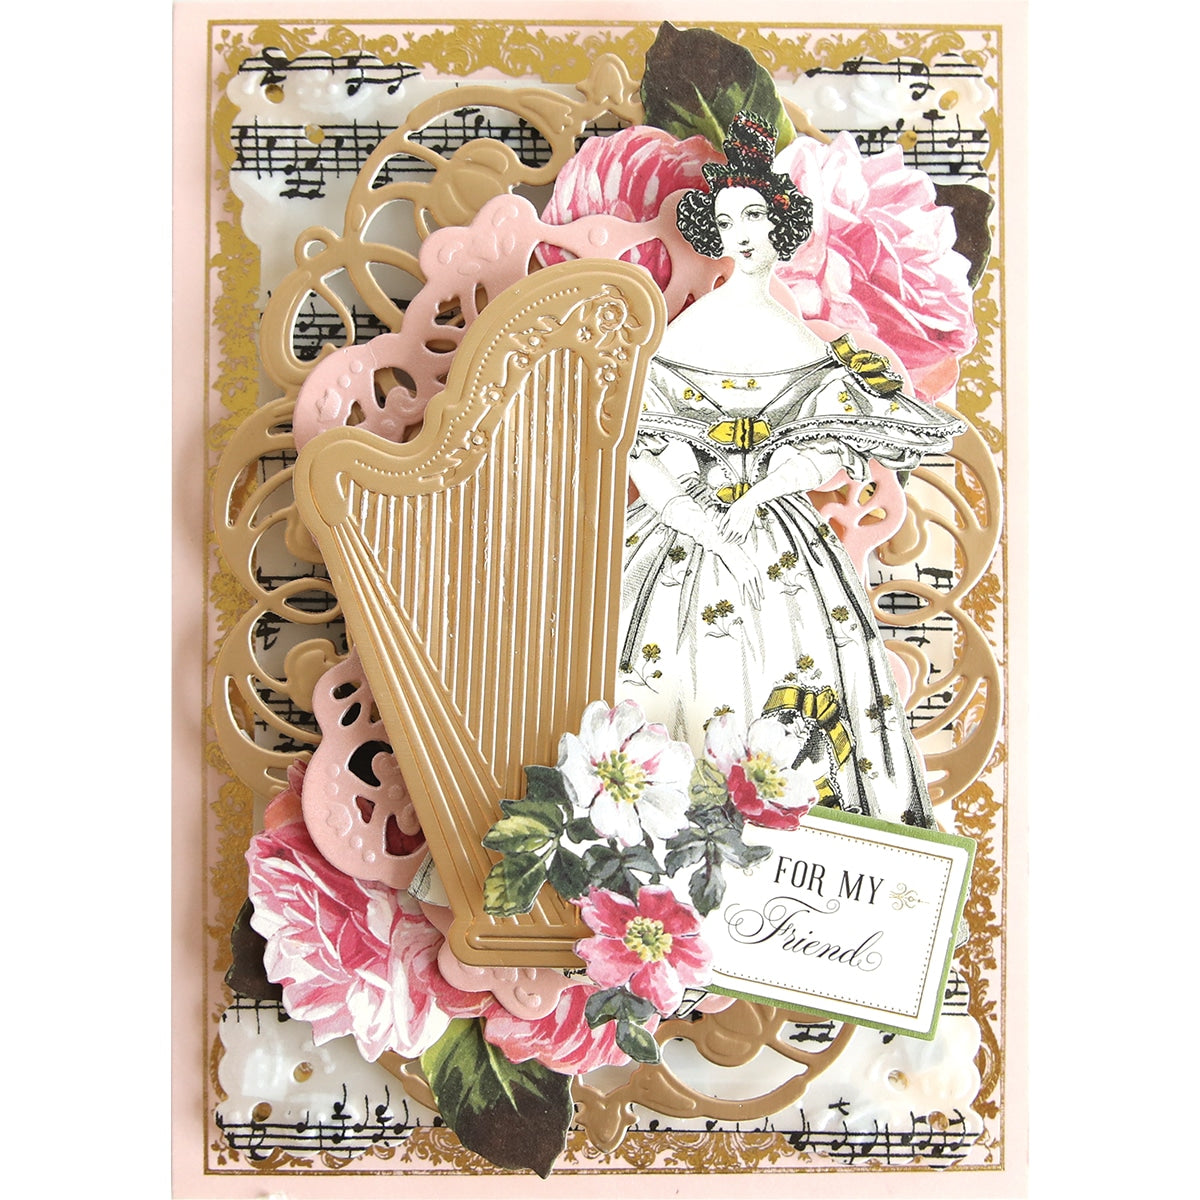 a card with a harp and flowers on it.